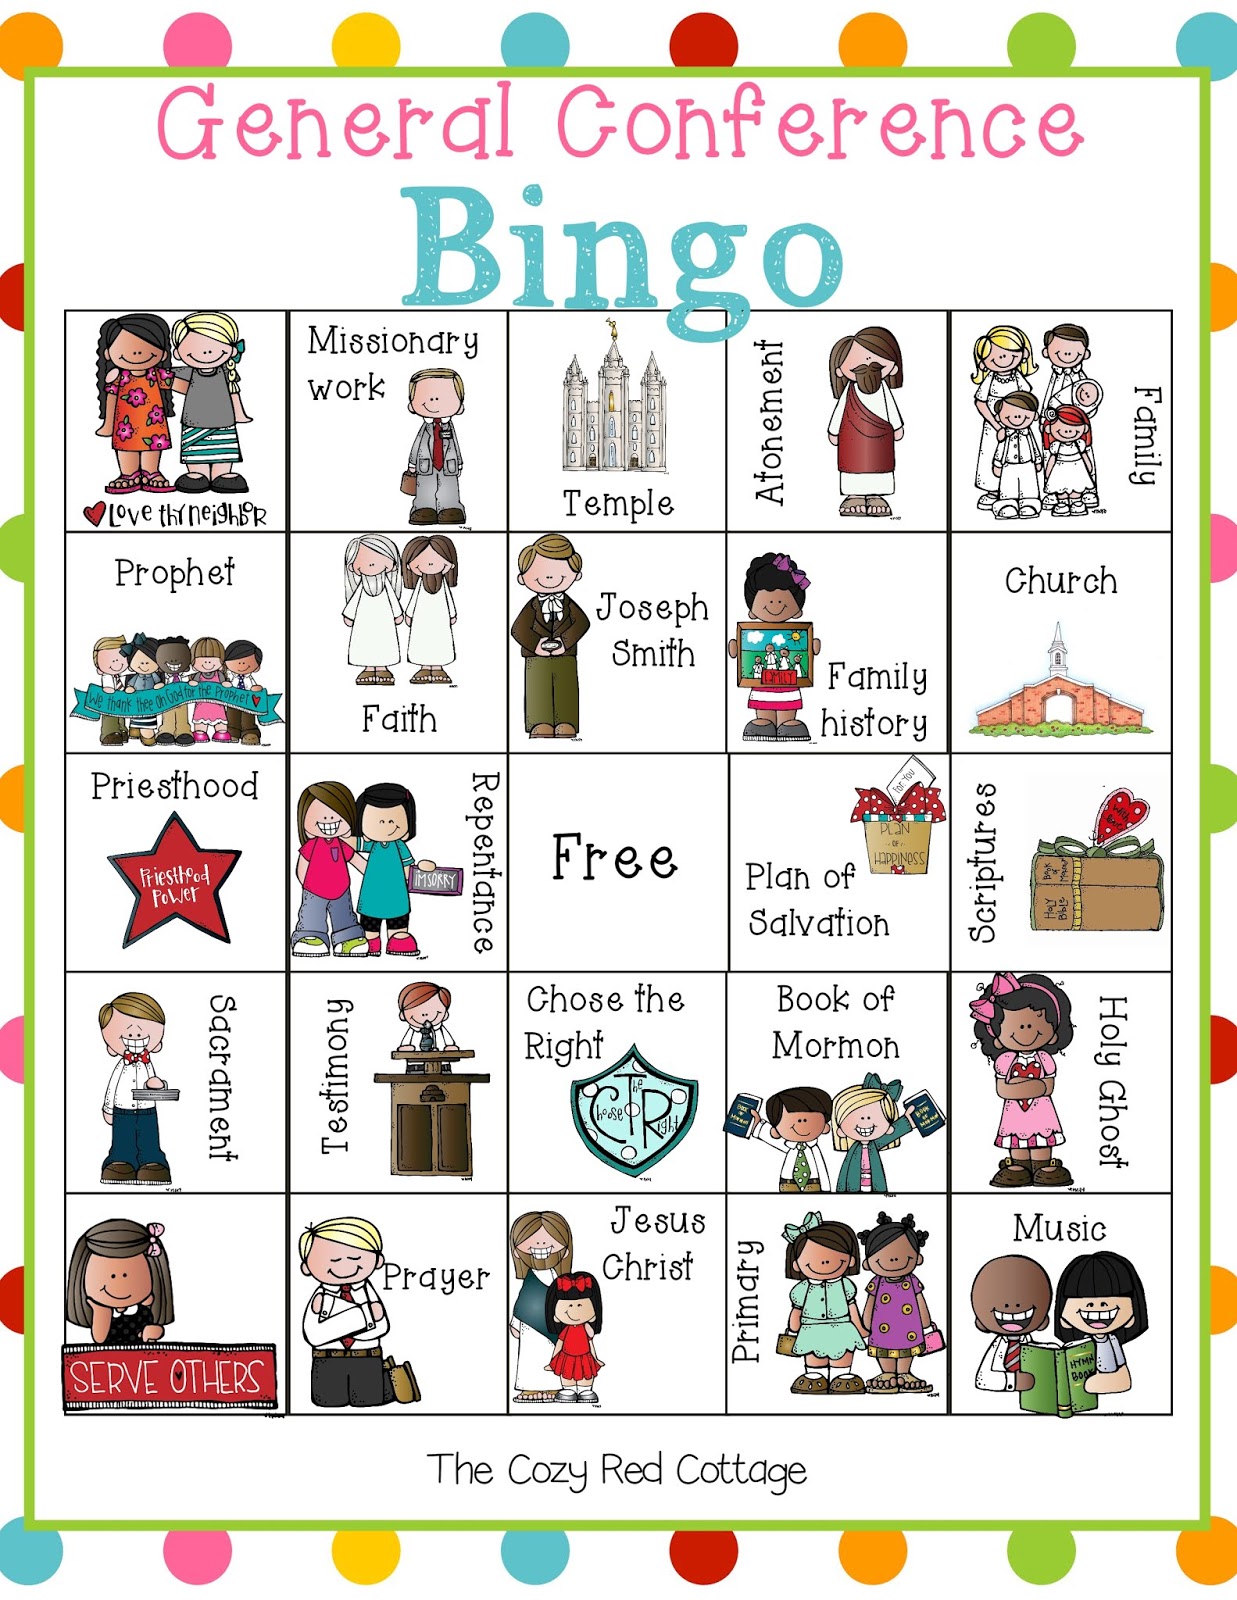 the-cozy-red-cottage-general-conference-bingo-match-game-and-mini